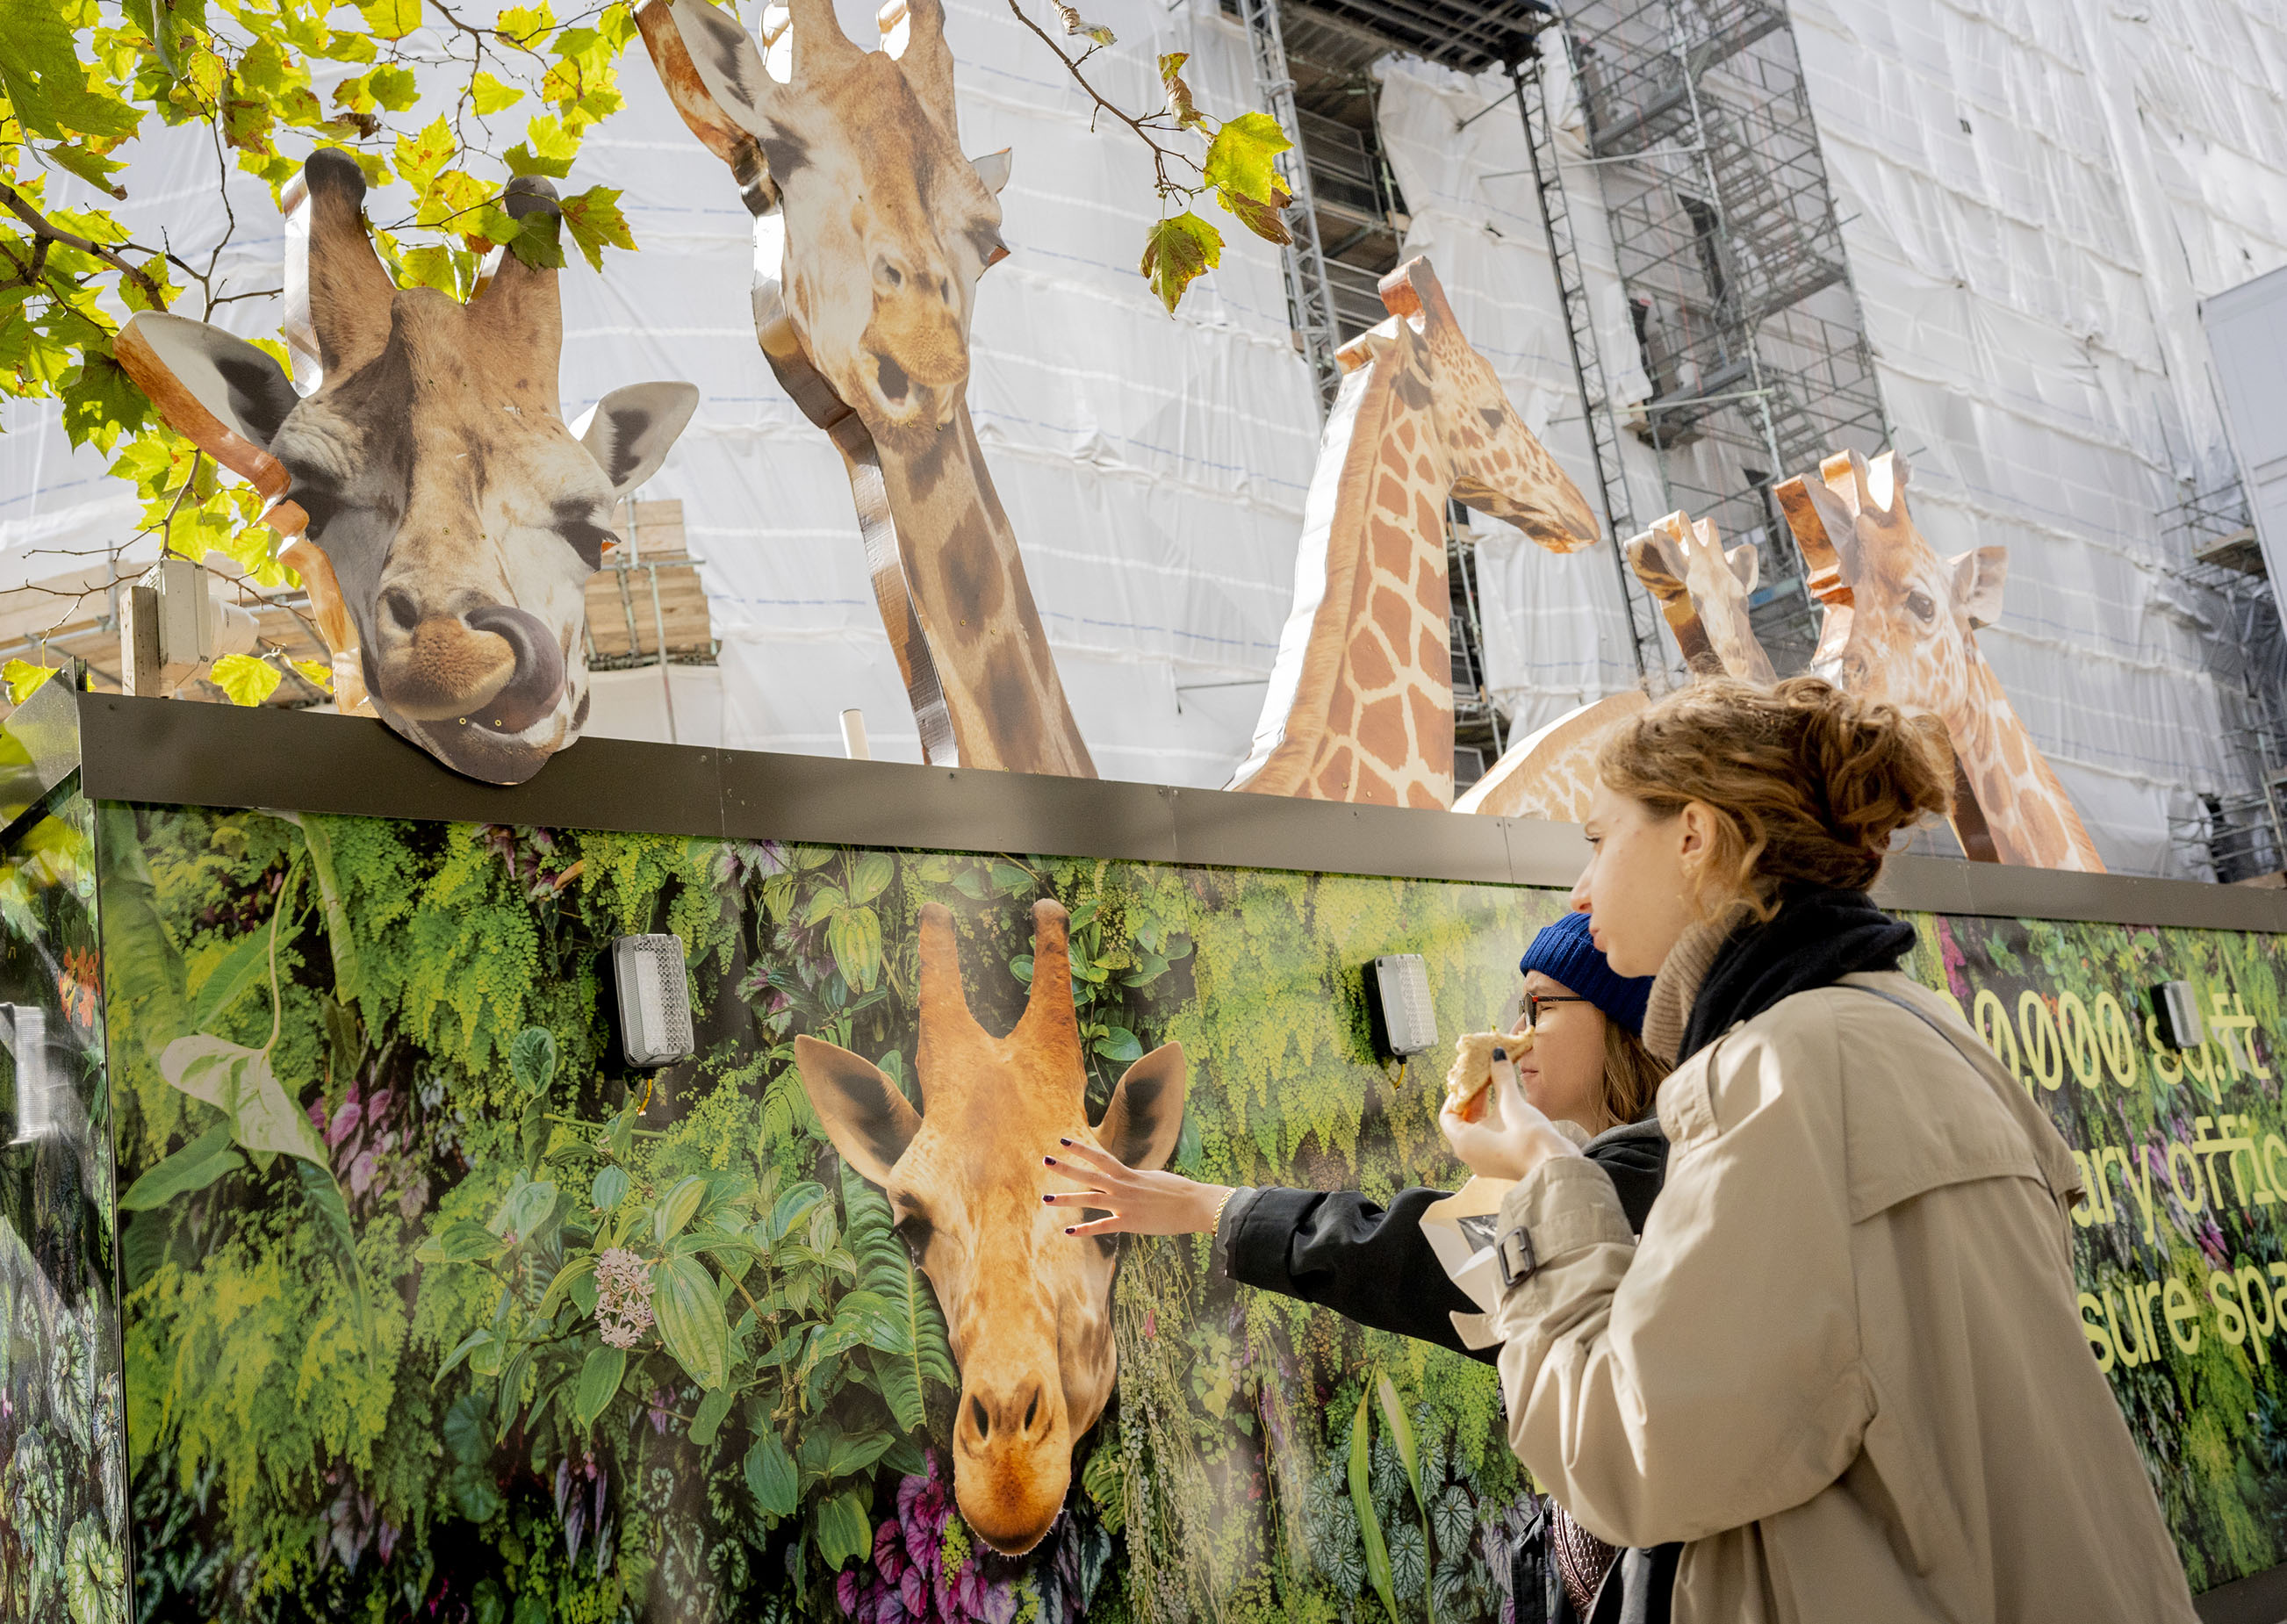 Cut outs of giraffes above hoarding